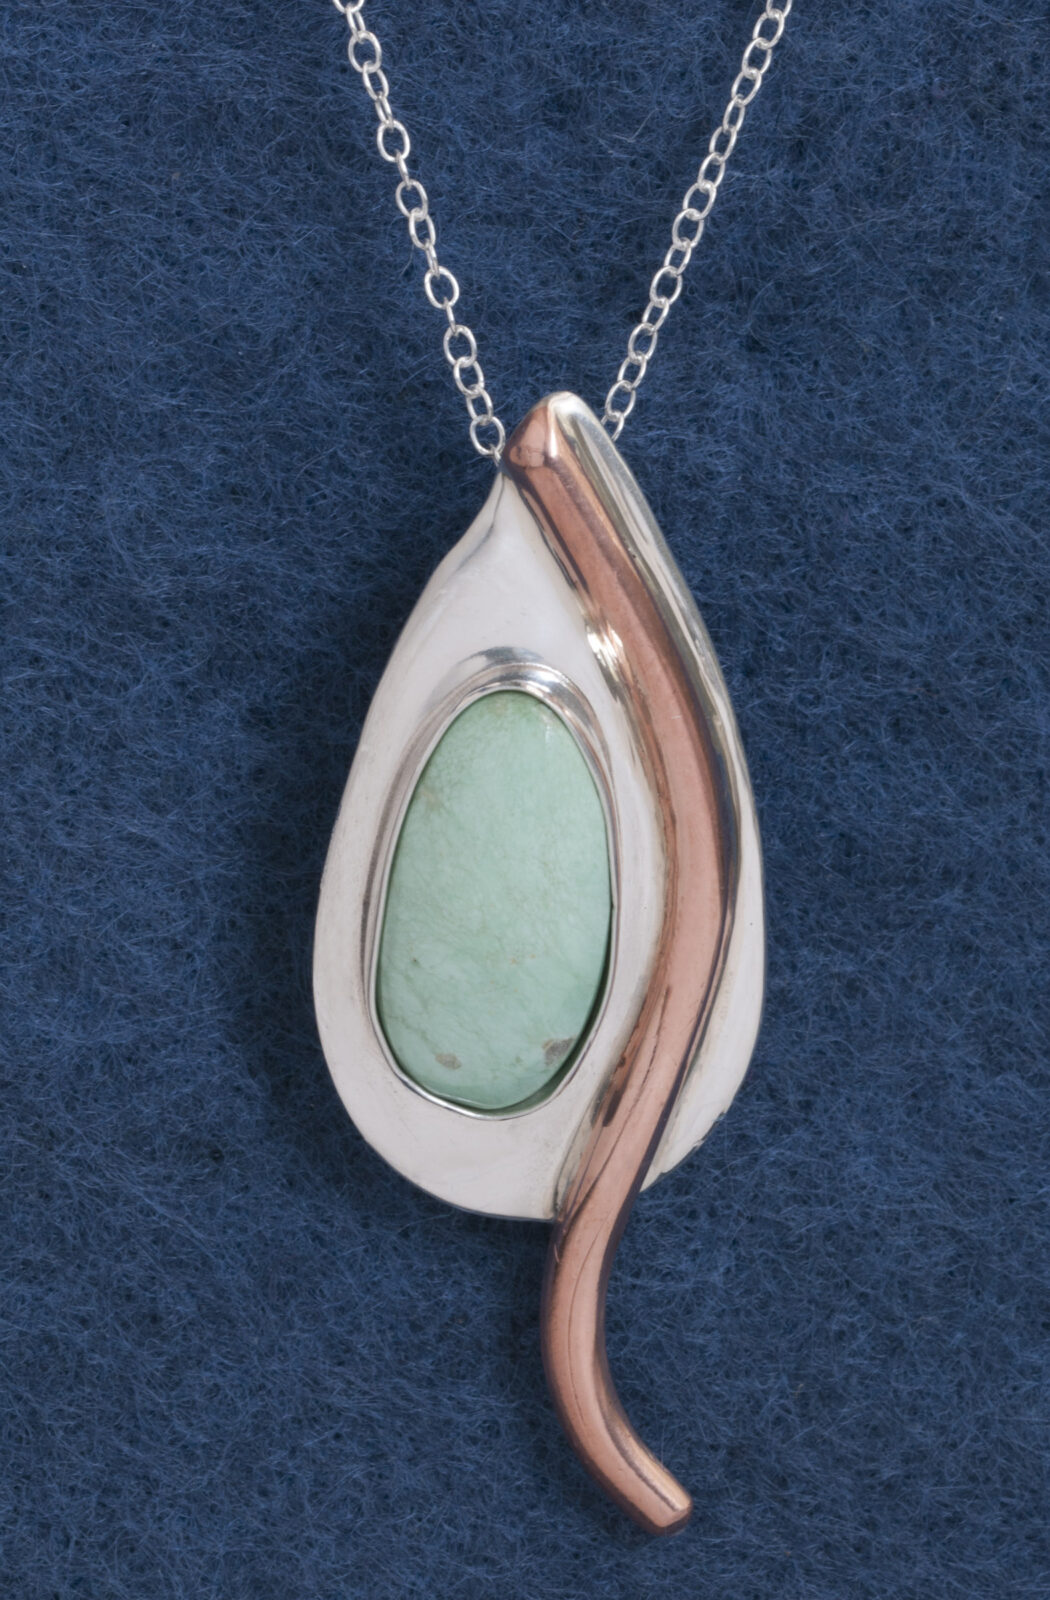 Silver pendant with mint green stone, copper accent